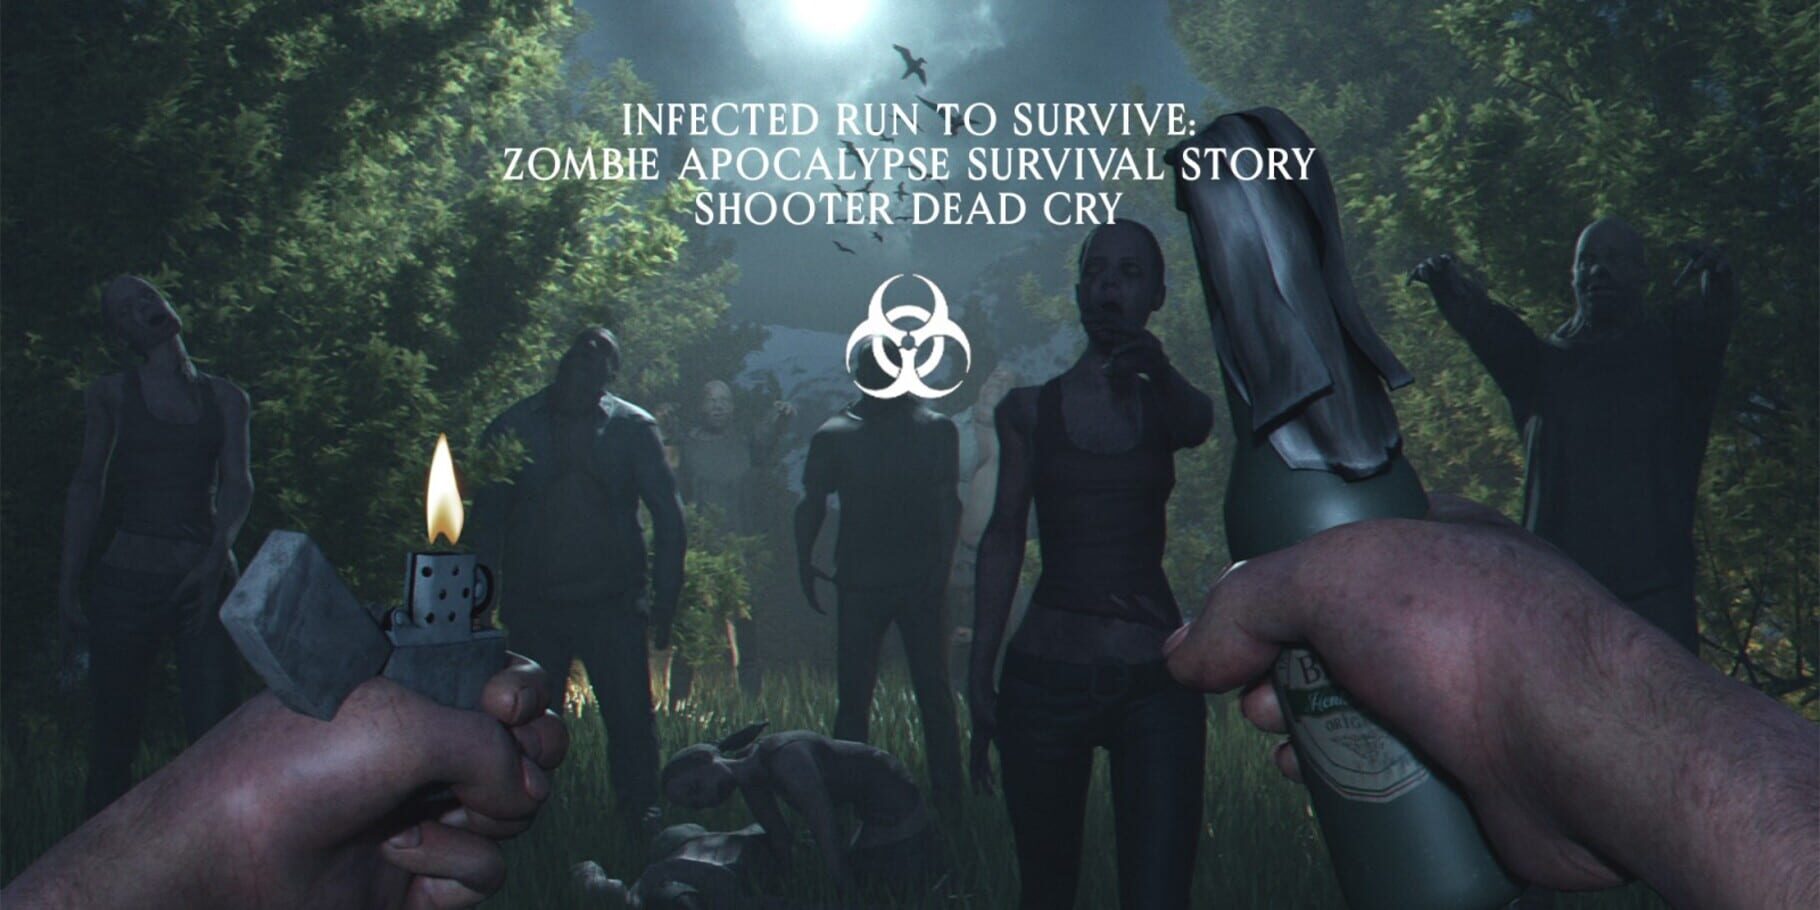 Infected run to Survive: Zombie Apocalypse Survival Story Shooter Dead Cry artwork